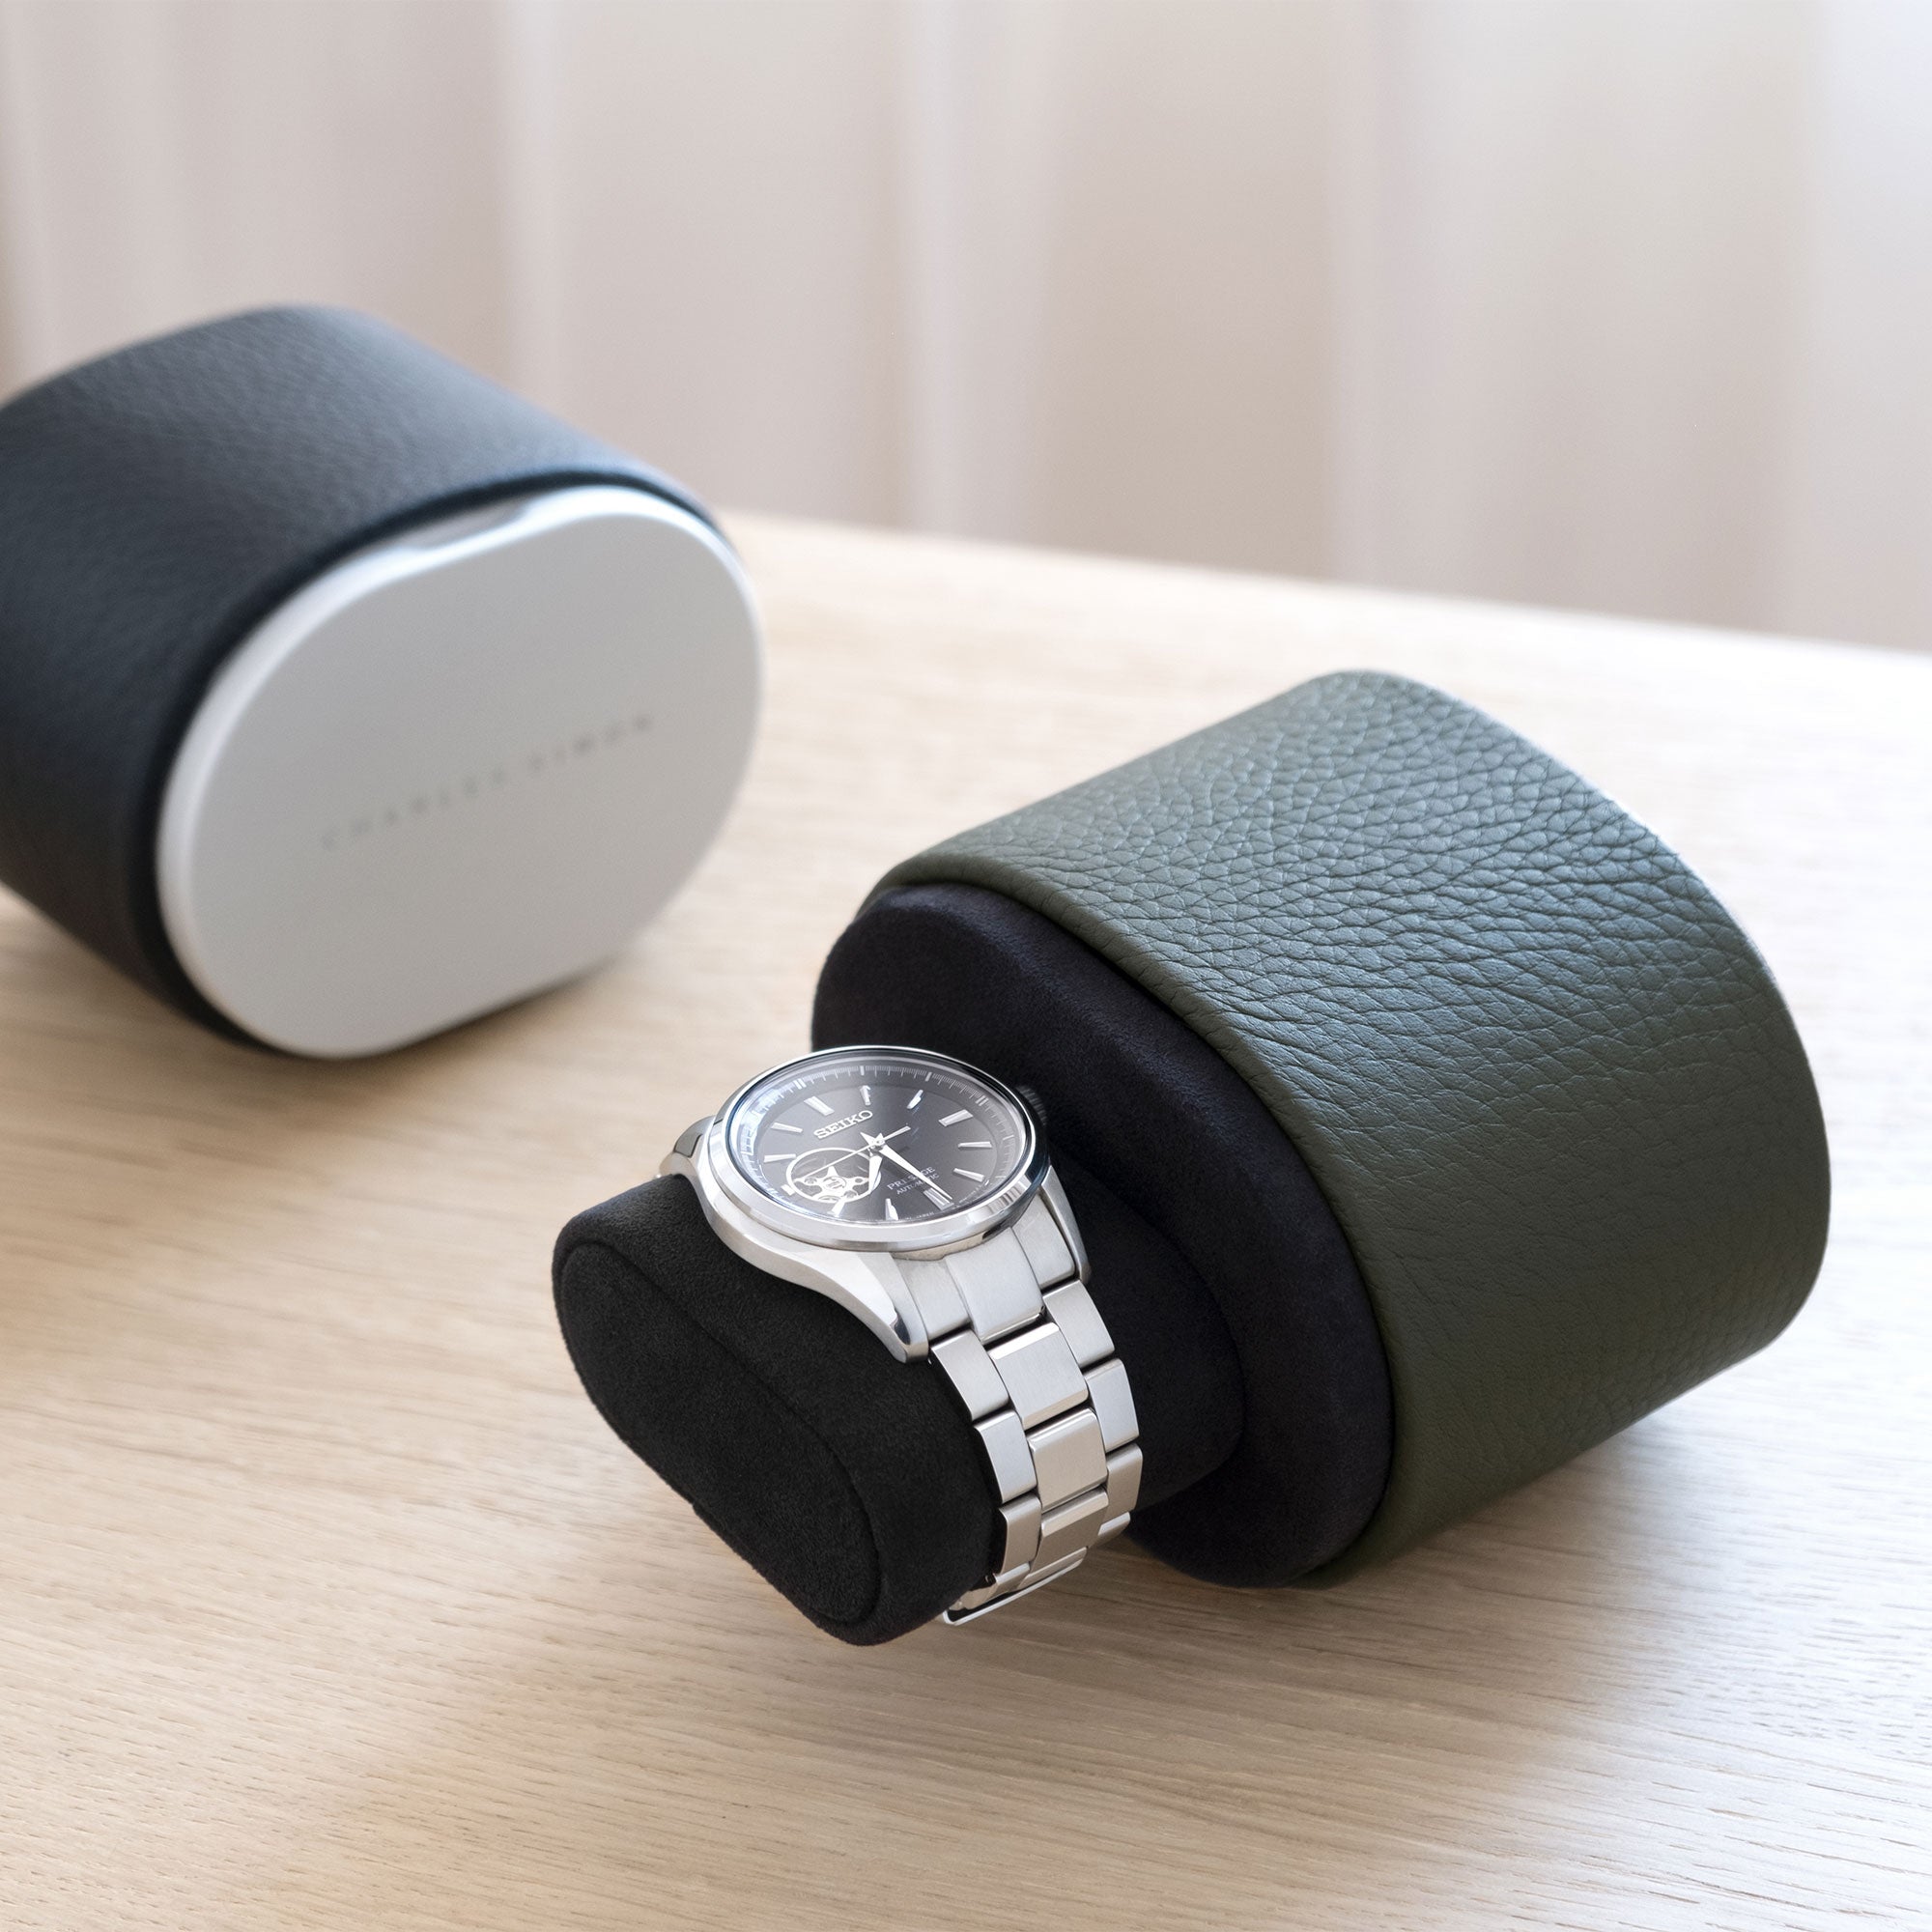 Lifestyle shot of open khaki leather Theo watch roll holding one watch on black Alcantara watch cushion. Closed black Theo luxury watch roll is placed in the background.